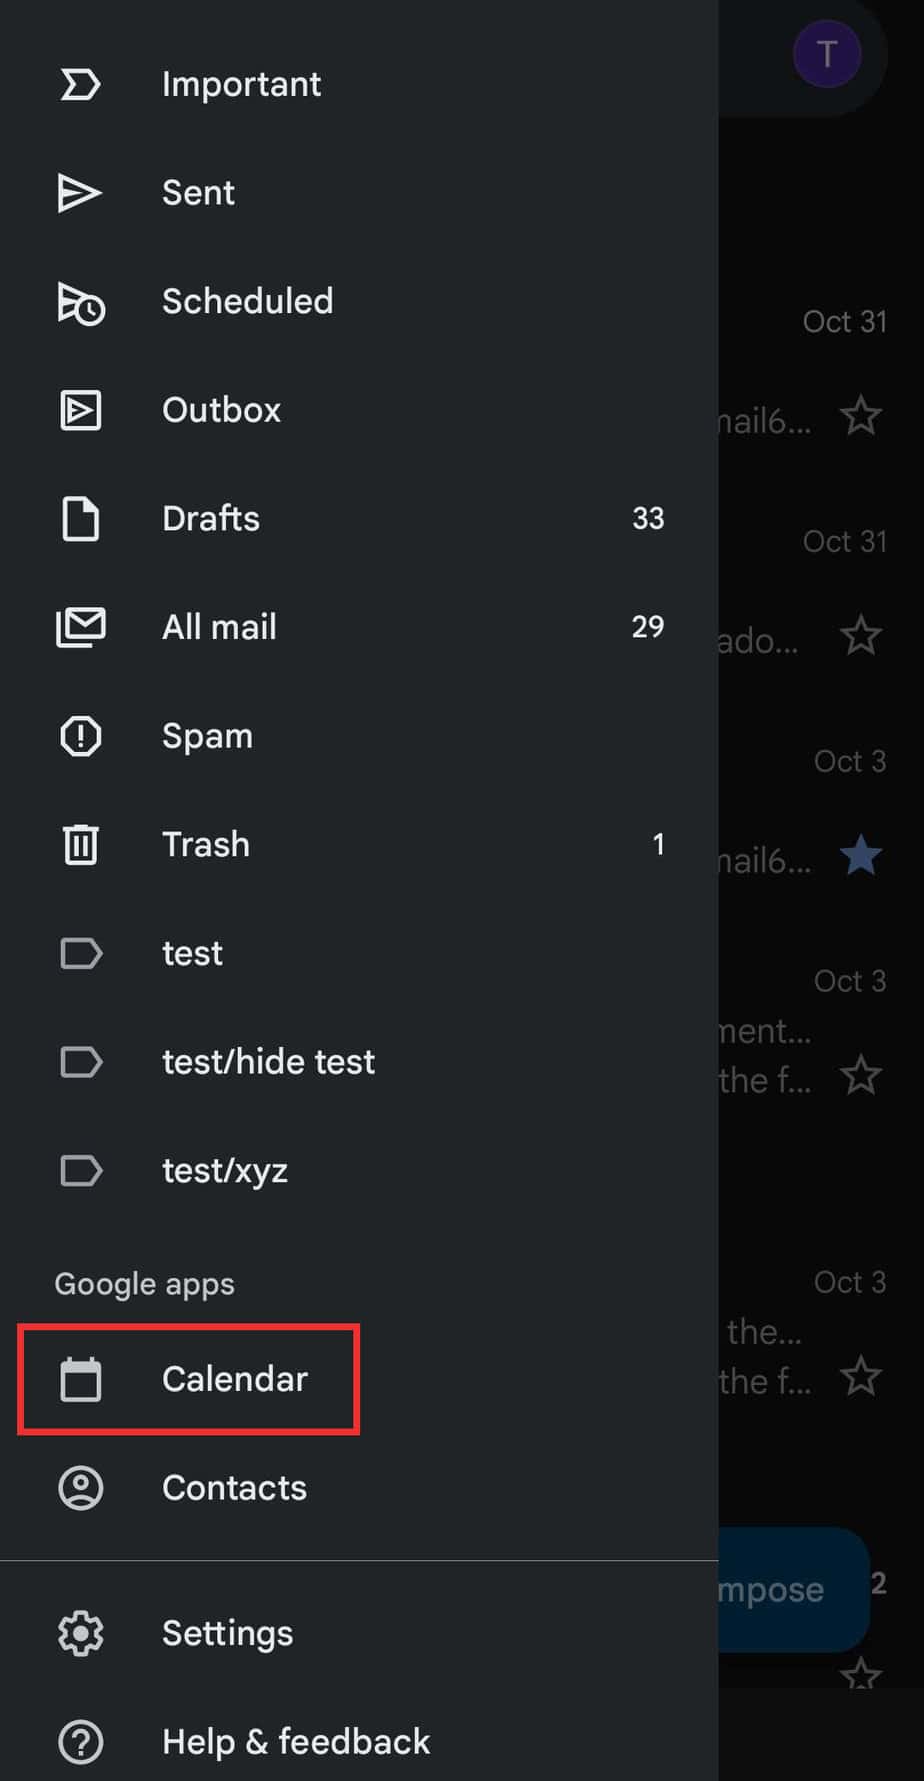 click-on-calendar-in-google-apps-section